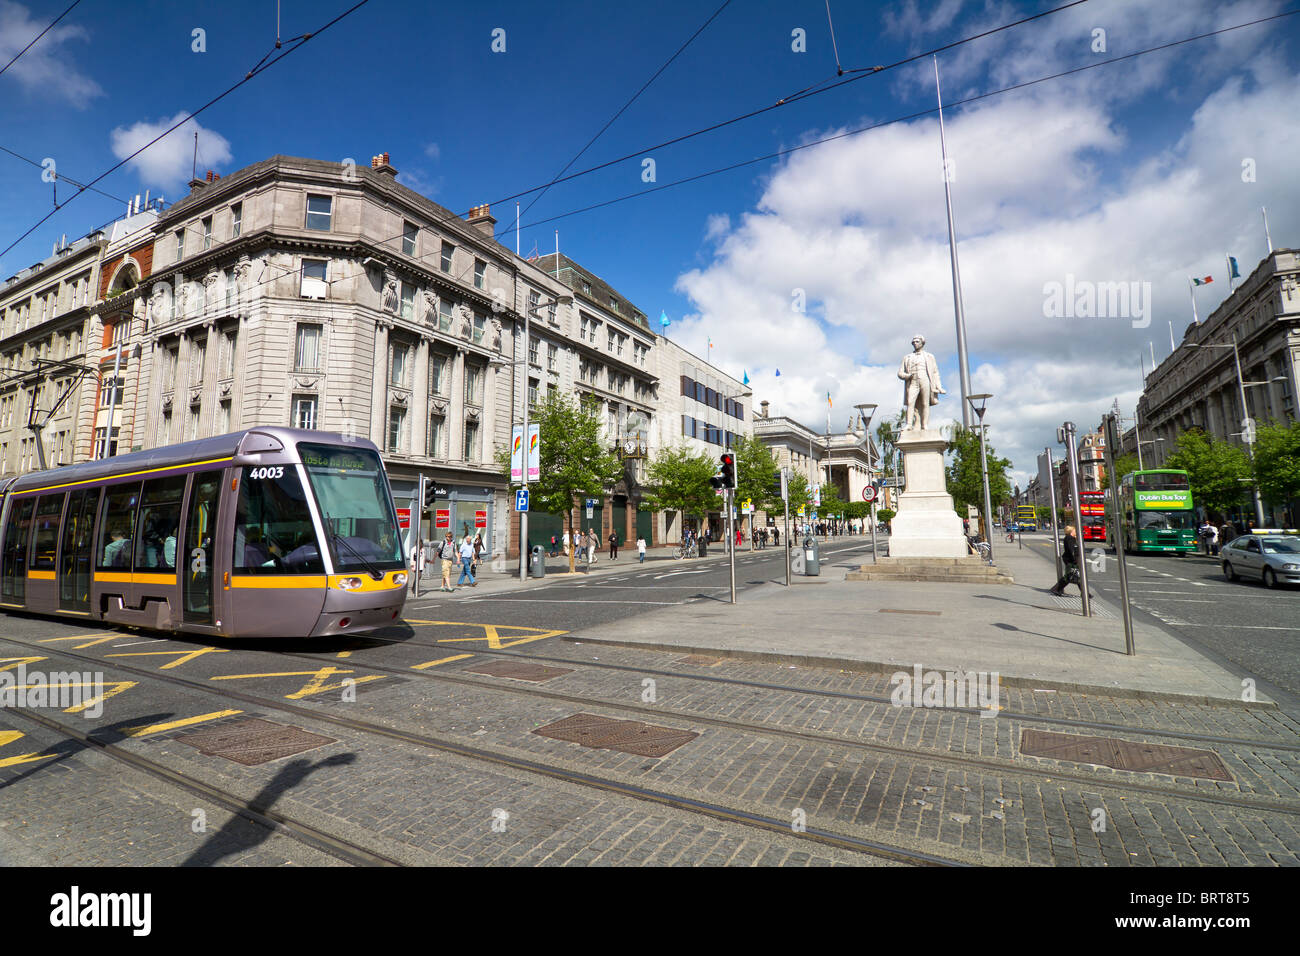 Dublin city centre with spire on O'Connell street and Luas tram. Stock Photo